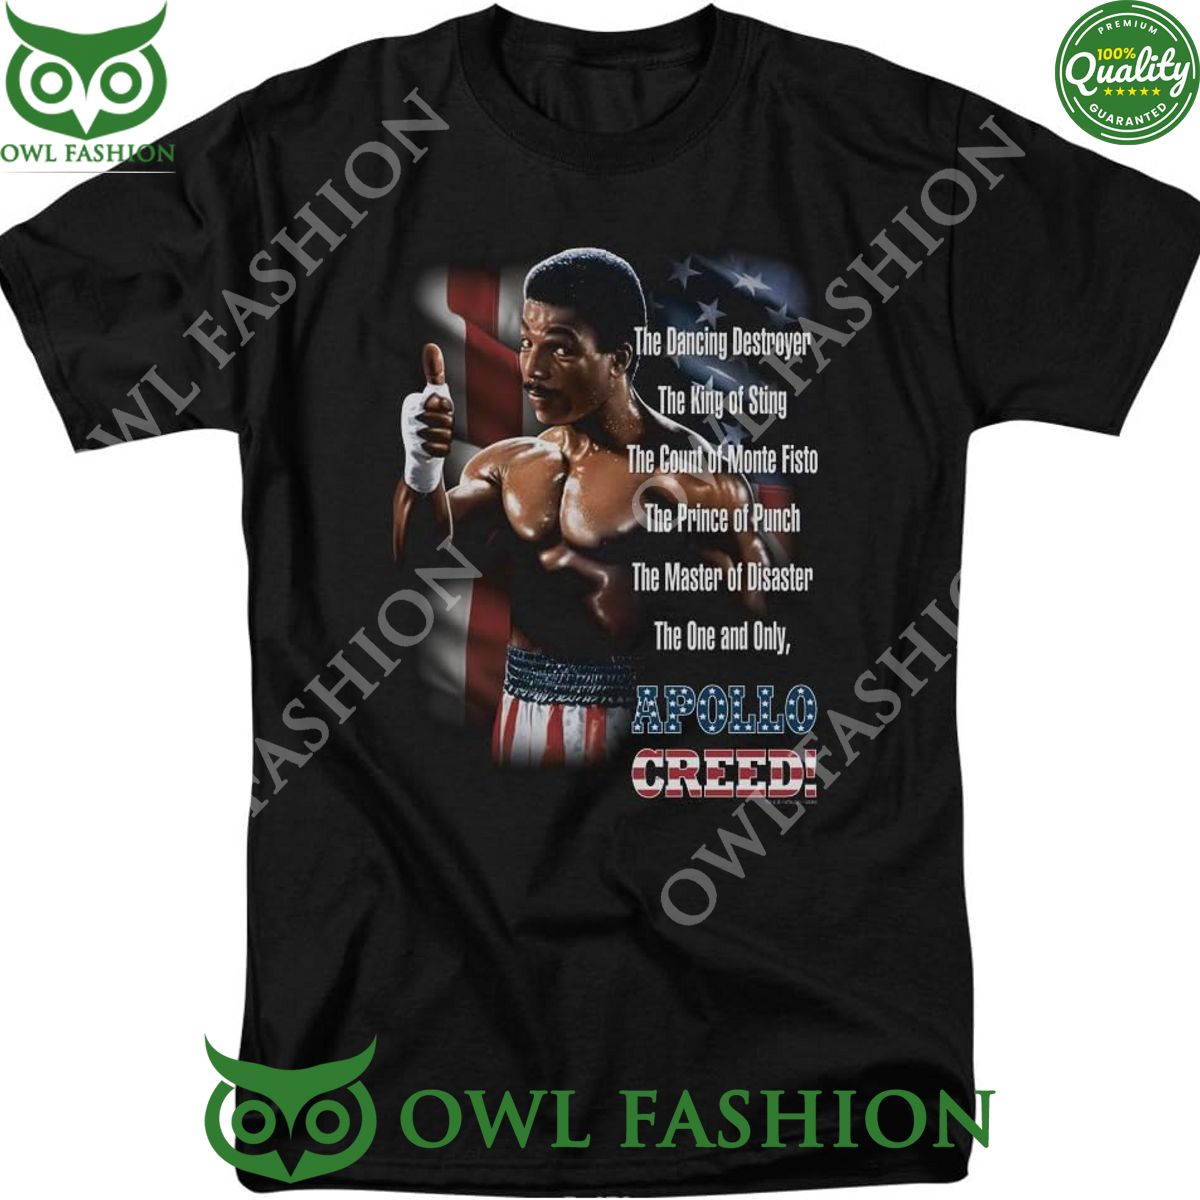 rocky ii one and only apollo creed the dancing destroyer black tee t shirt 1 UIBGS.jpg